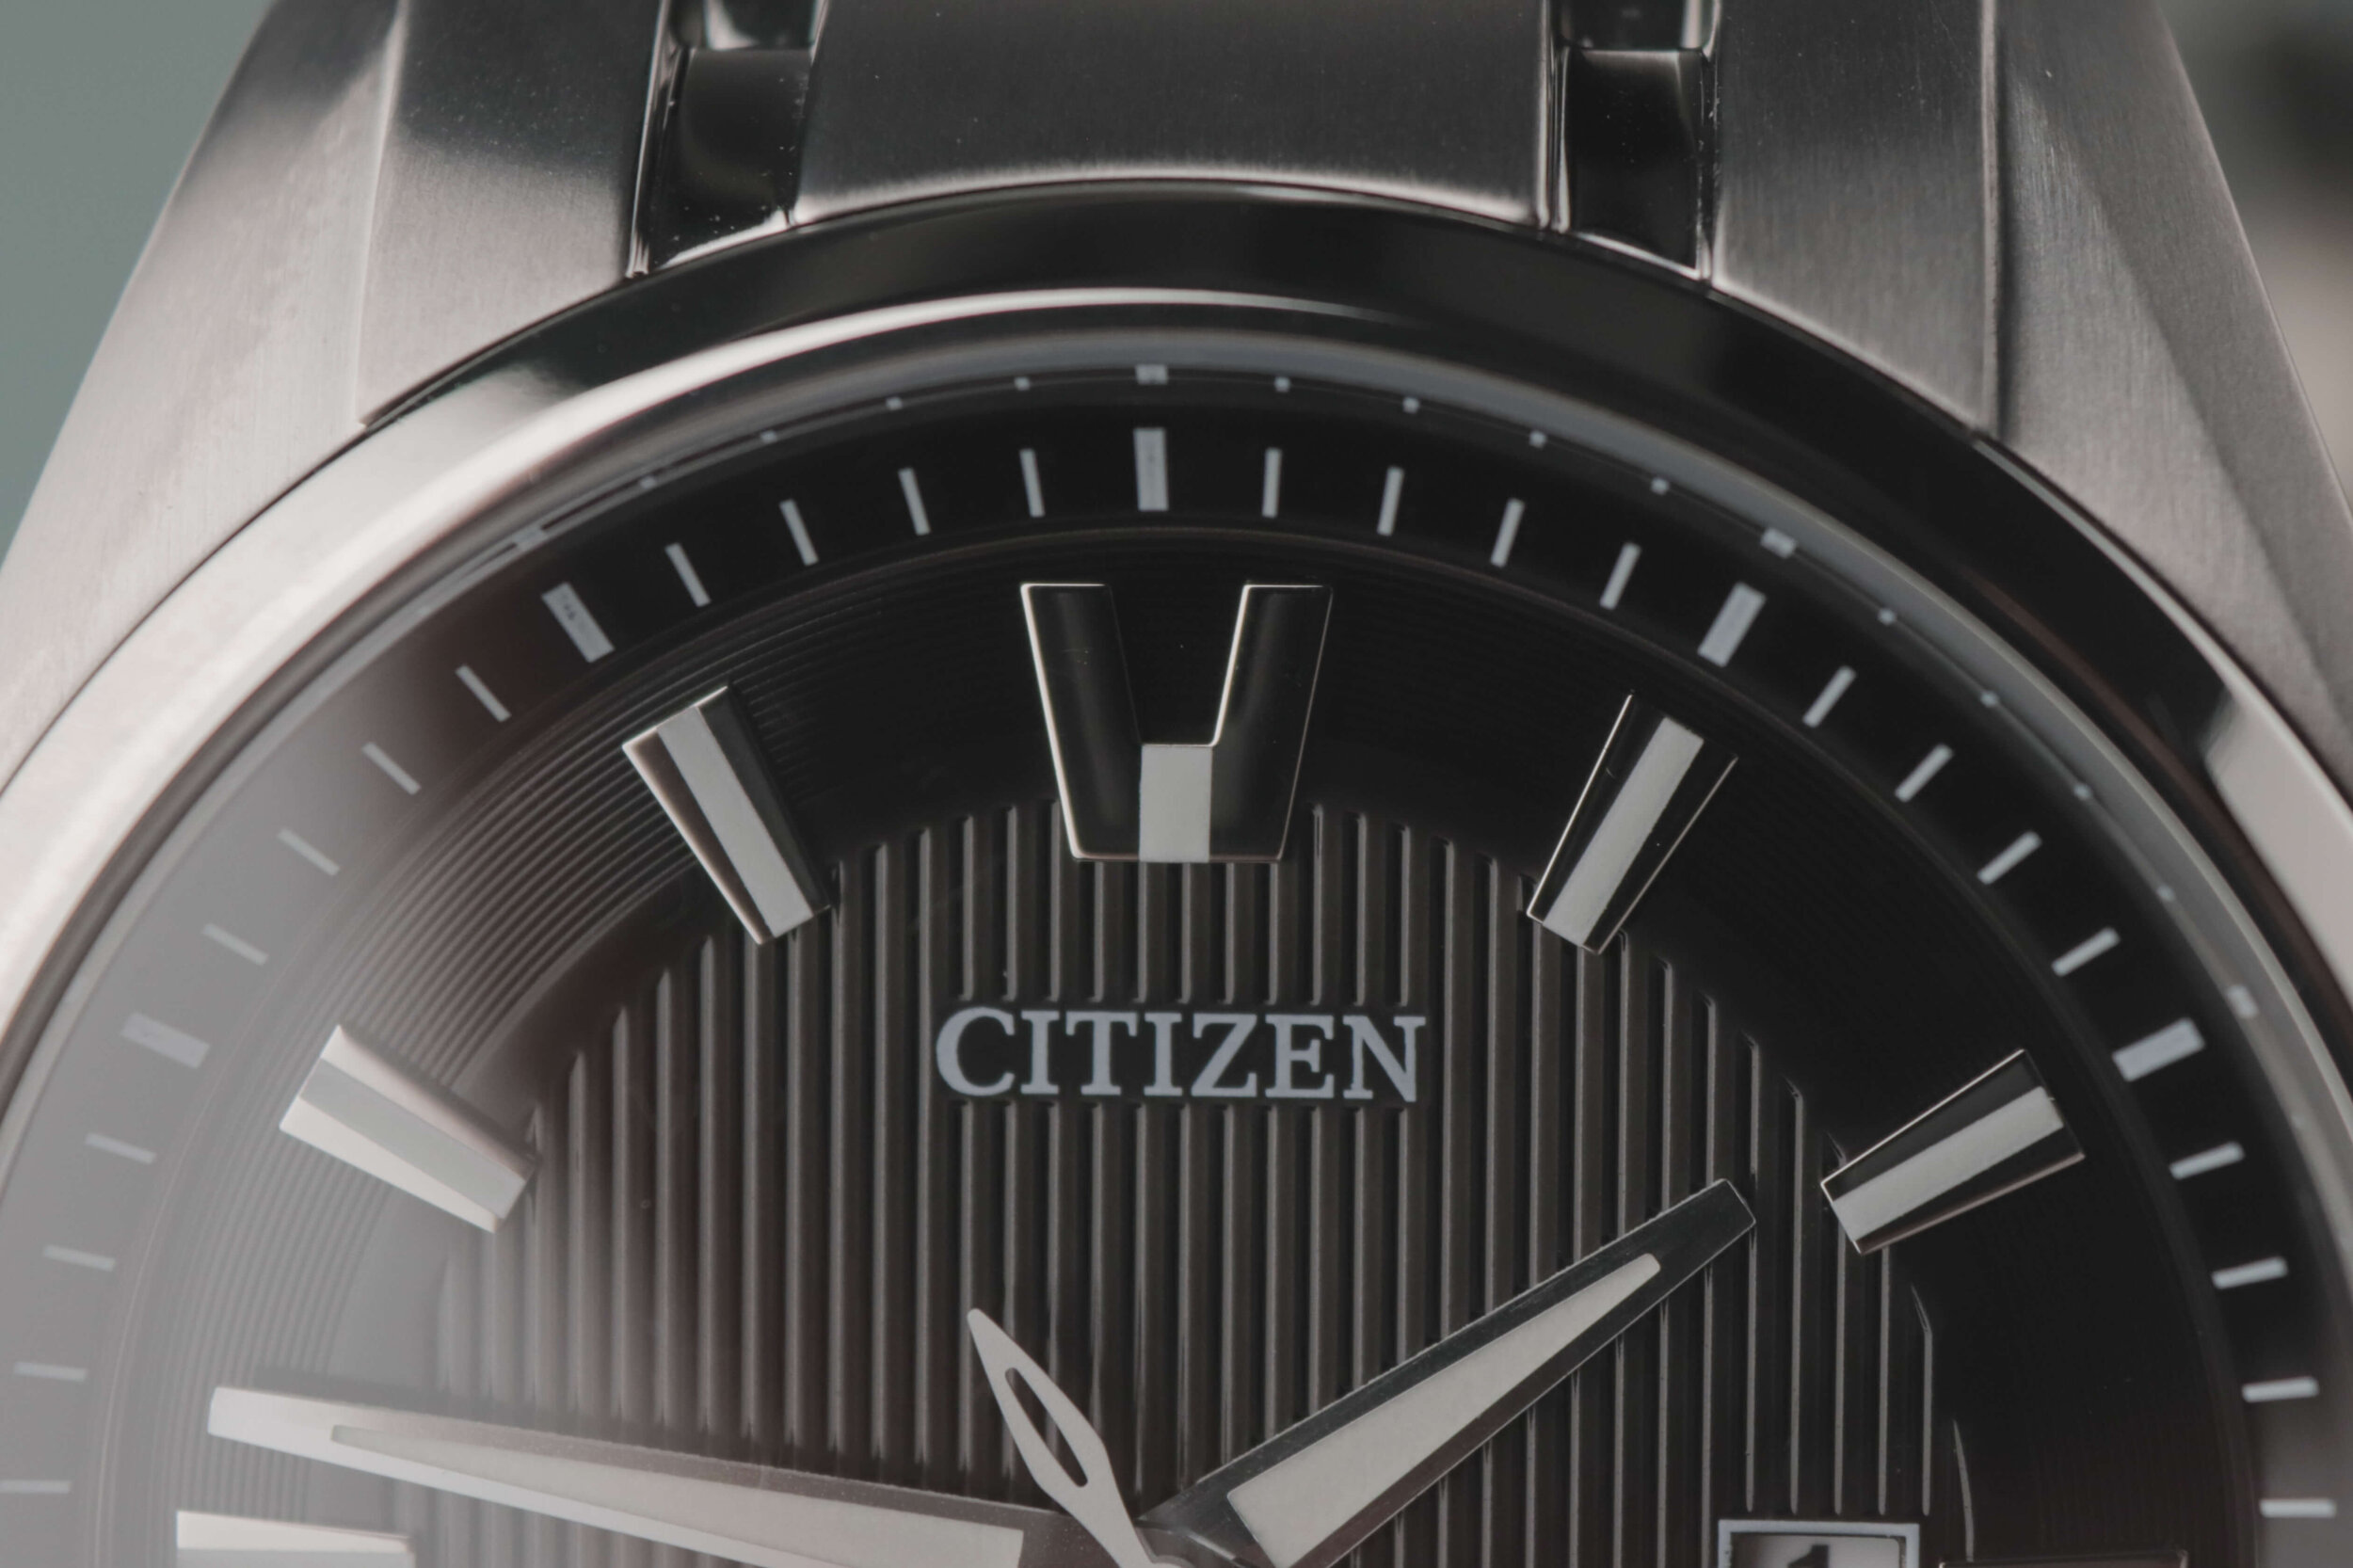 Are Citizen Watches Any Good? Was I Too Harsh On Citizen? — Ben's Watch Club